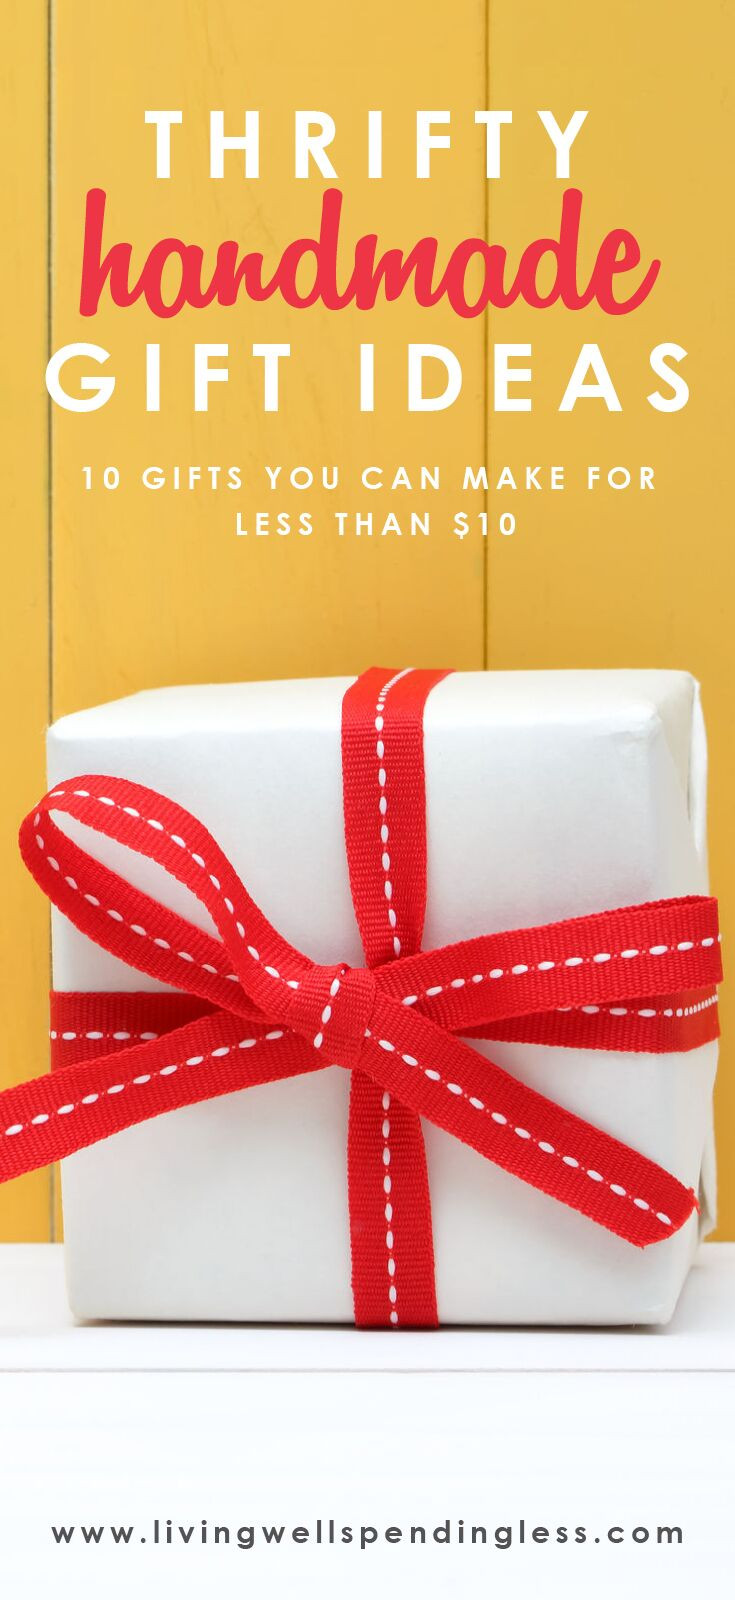 DIY Gifts Under $10
 10 Homemade Gift Ideas for Under $10